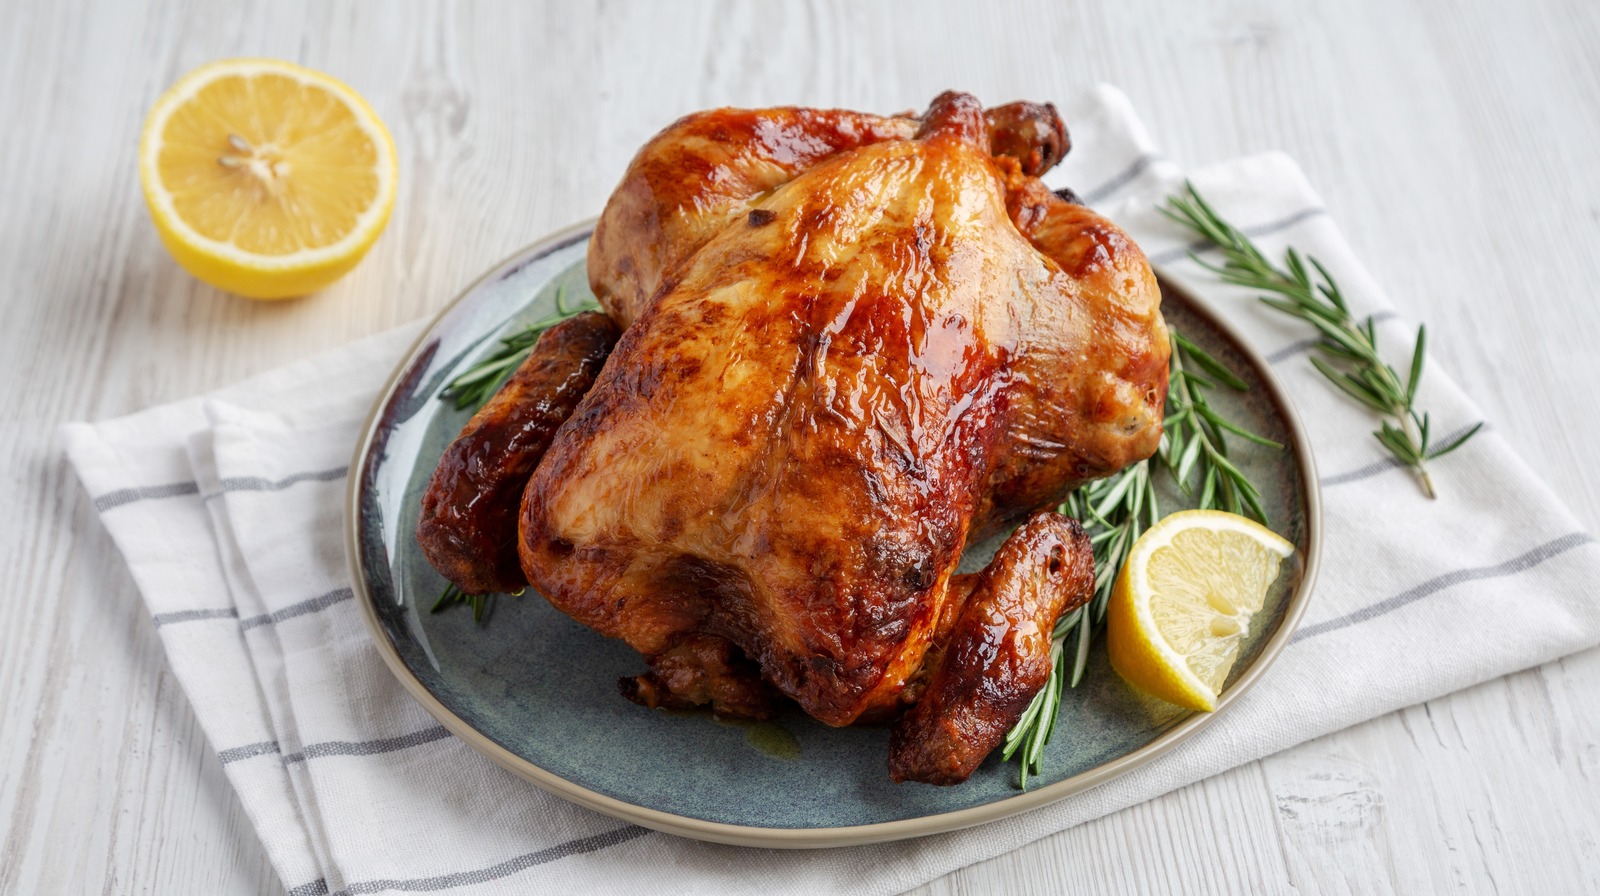 14 Uses For Store-Bought Rotisserie Chicken